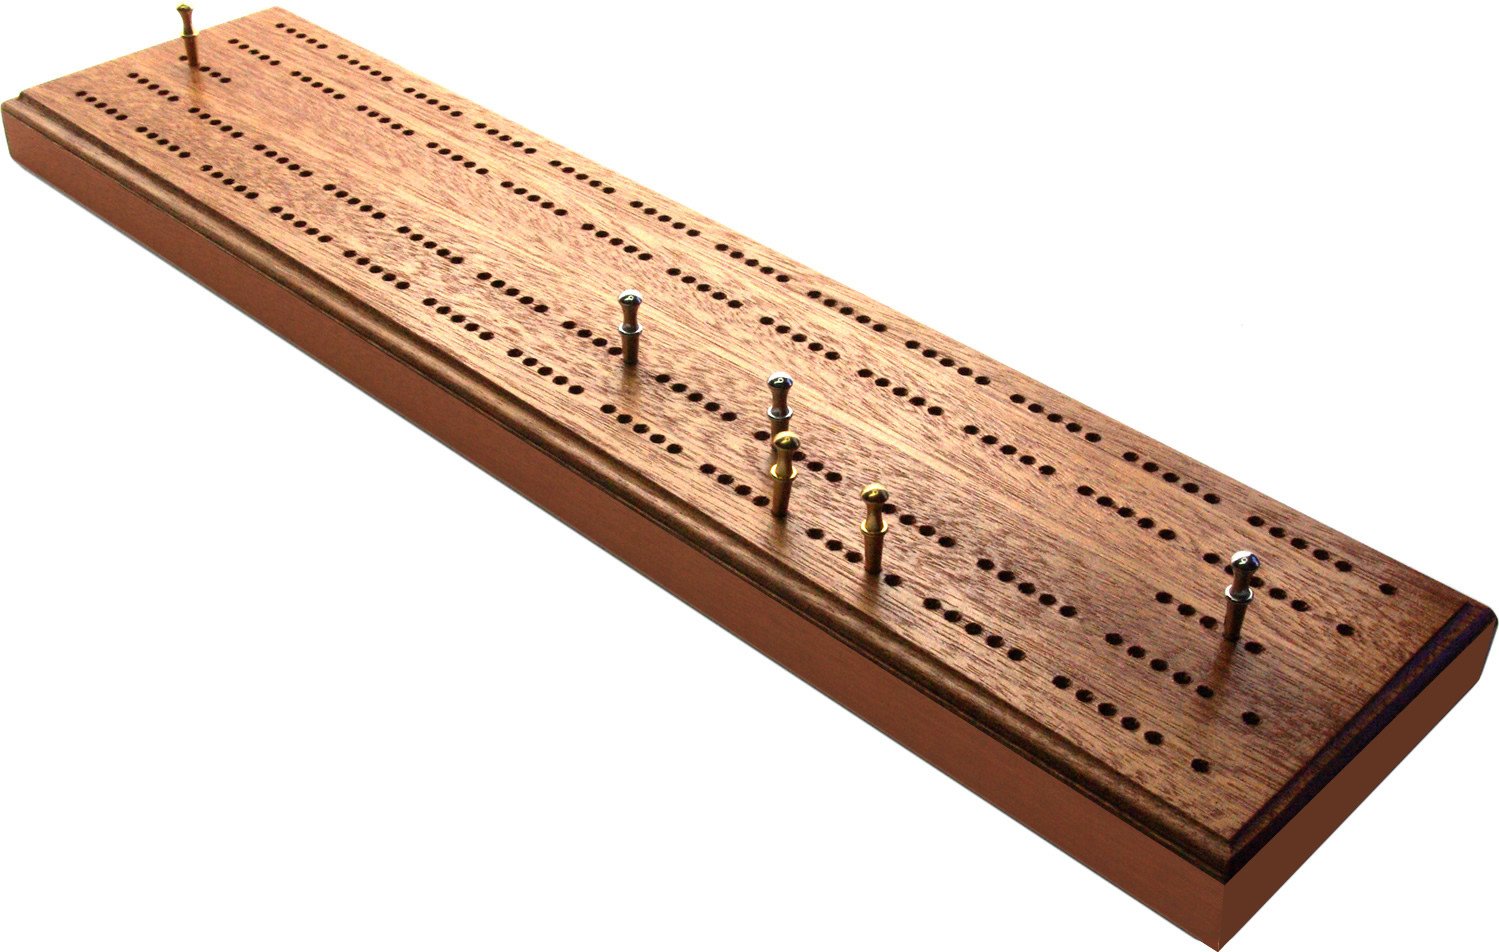 Competition size British wooden cribbage board